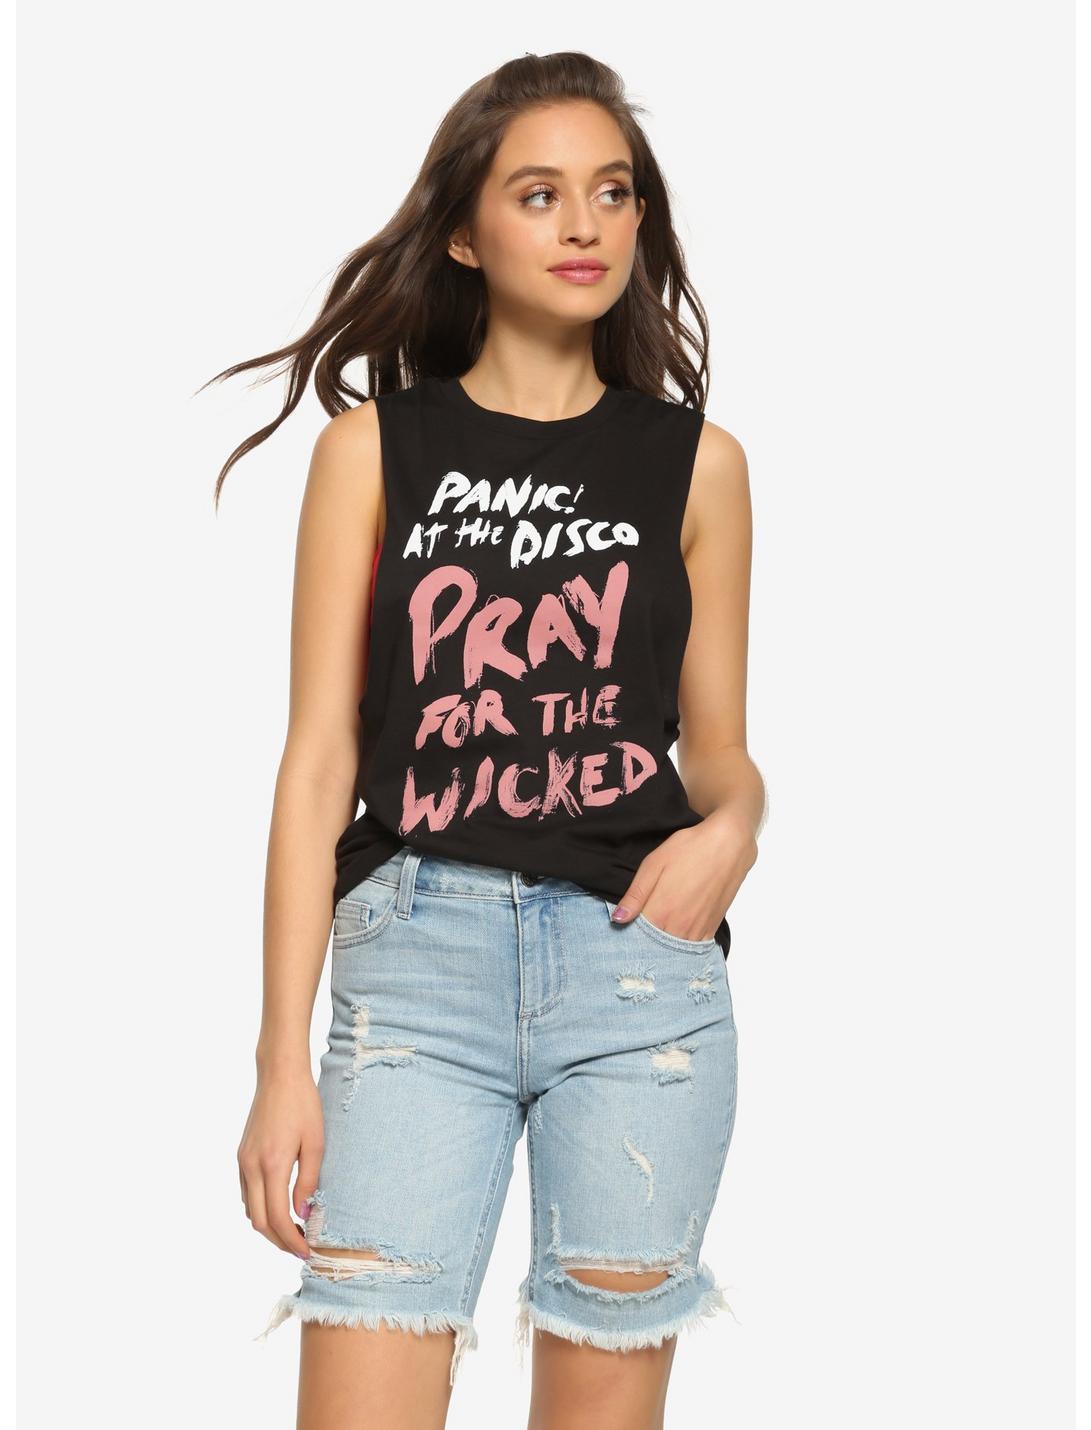 Panic! At The Disco Pray For The Wicked Girls Muscle Top | Hot Topic